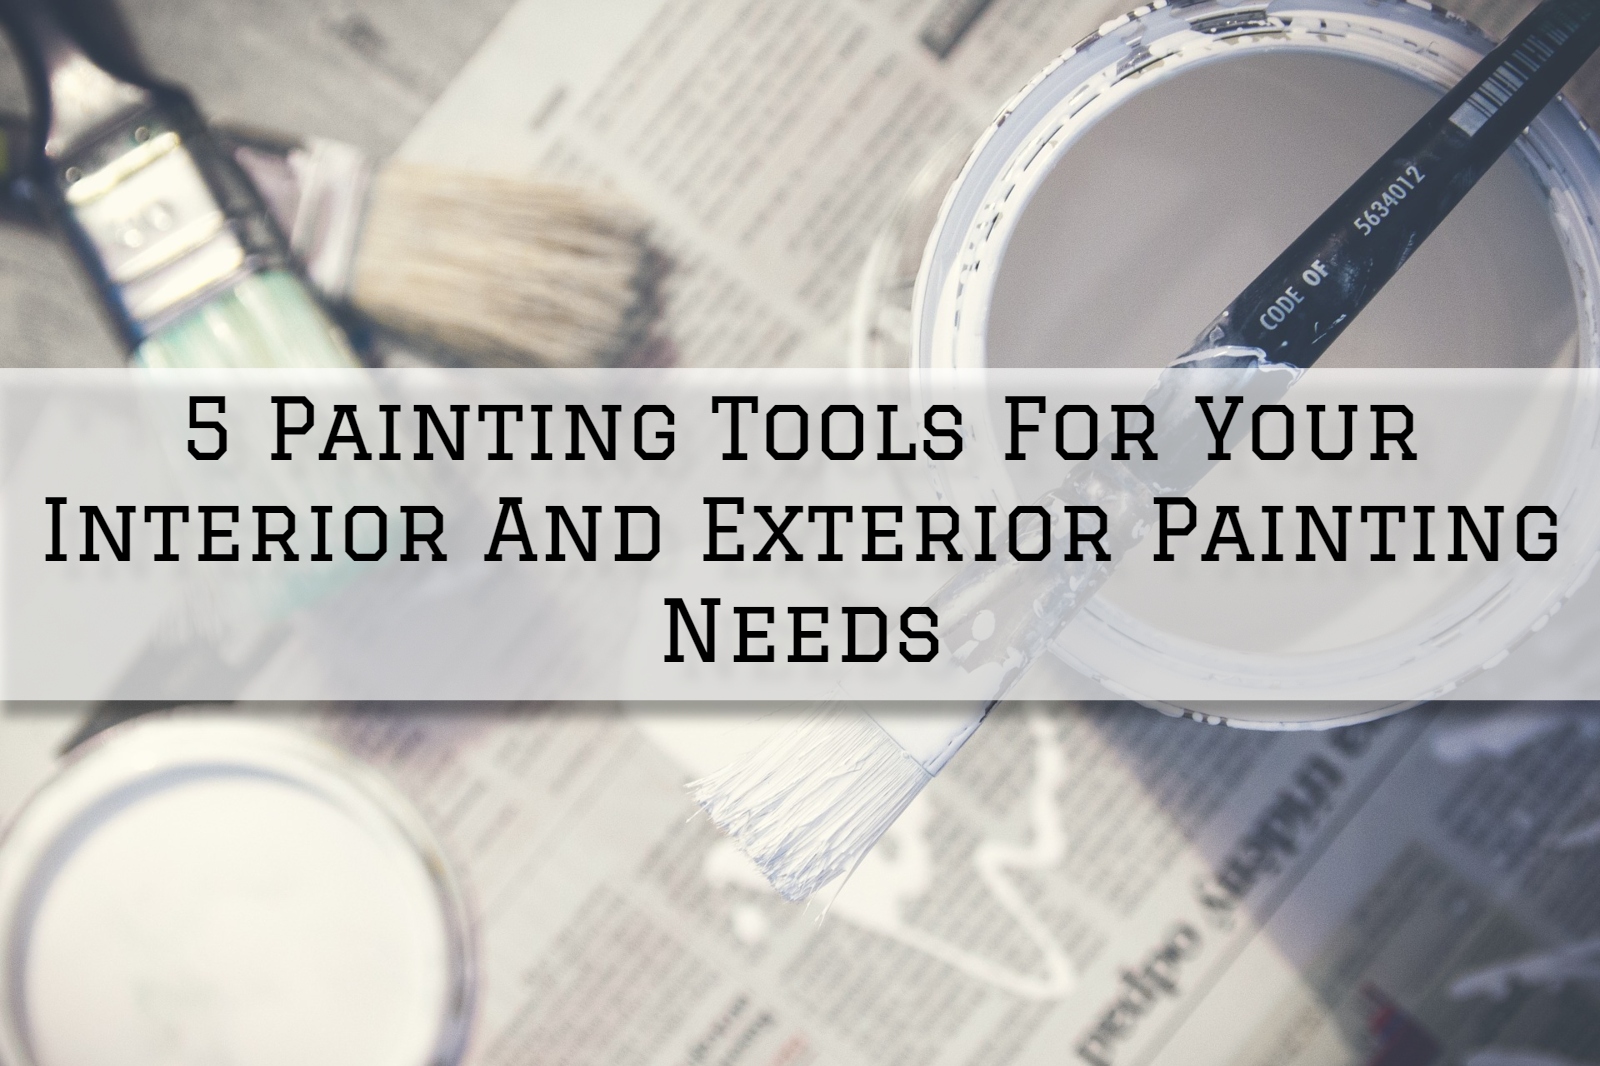 2021-11-16 Left Moon Painting Company West Chester PA 5 Painting Tools For Your Interior And Exterior Painting Needs